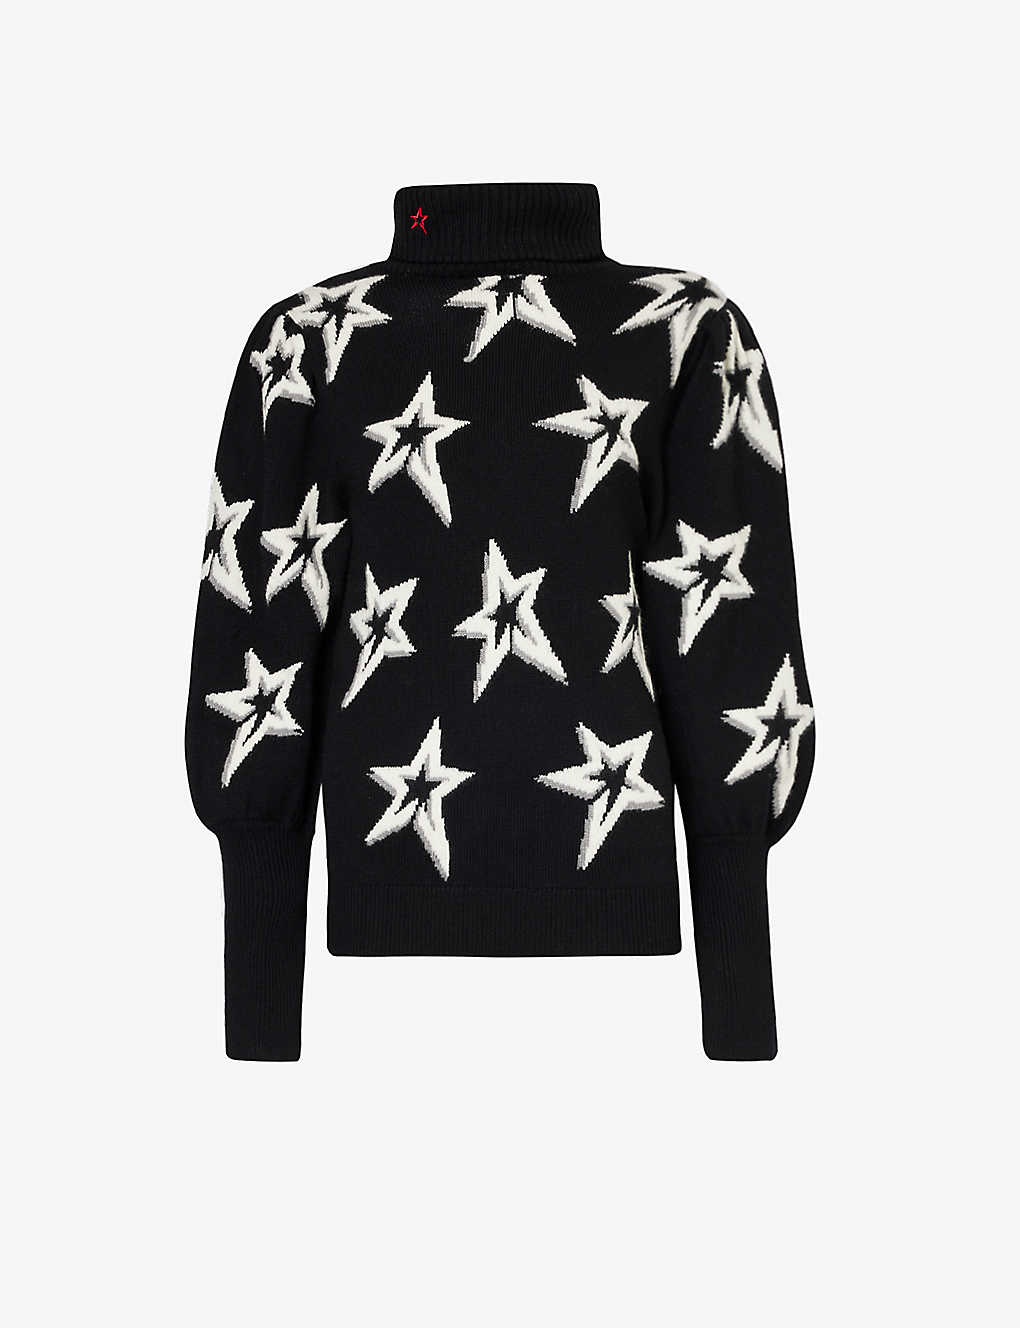 PERFECT MOMENT PERFECT MOMENT WOMEN'S BLACK STAR DUST STAR DUST TURTLENECK WOOL KNITTED JUMPER